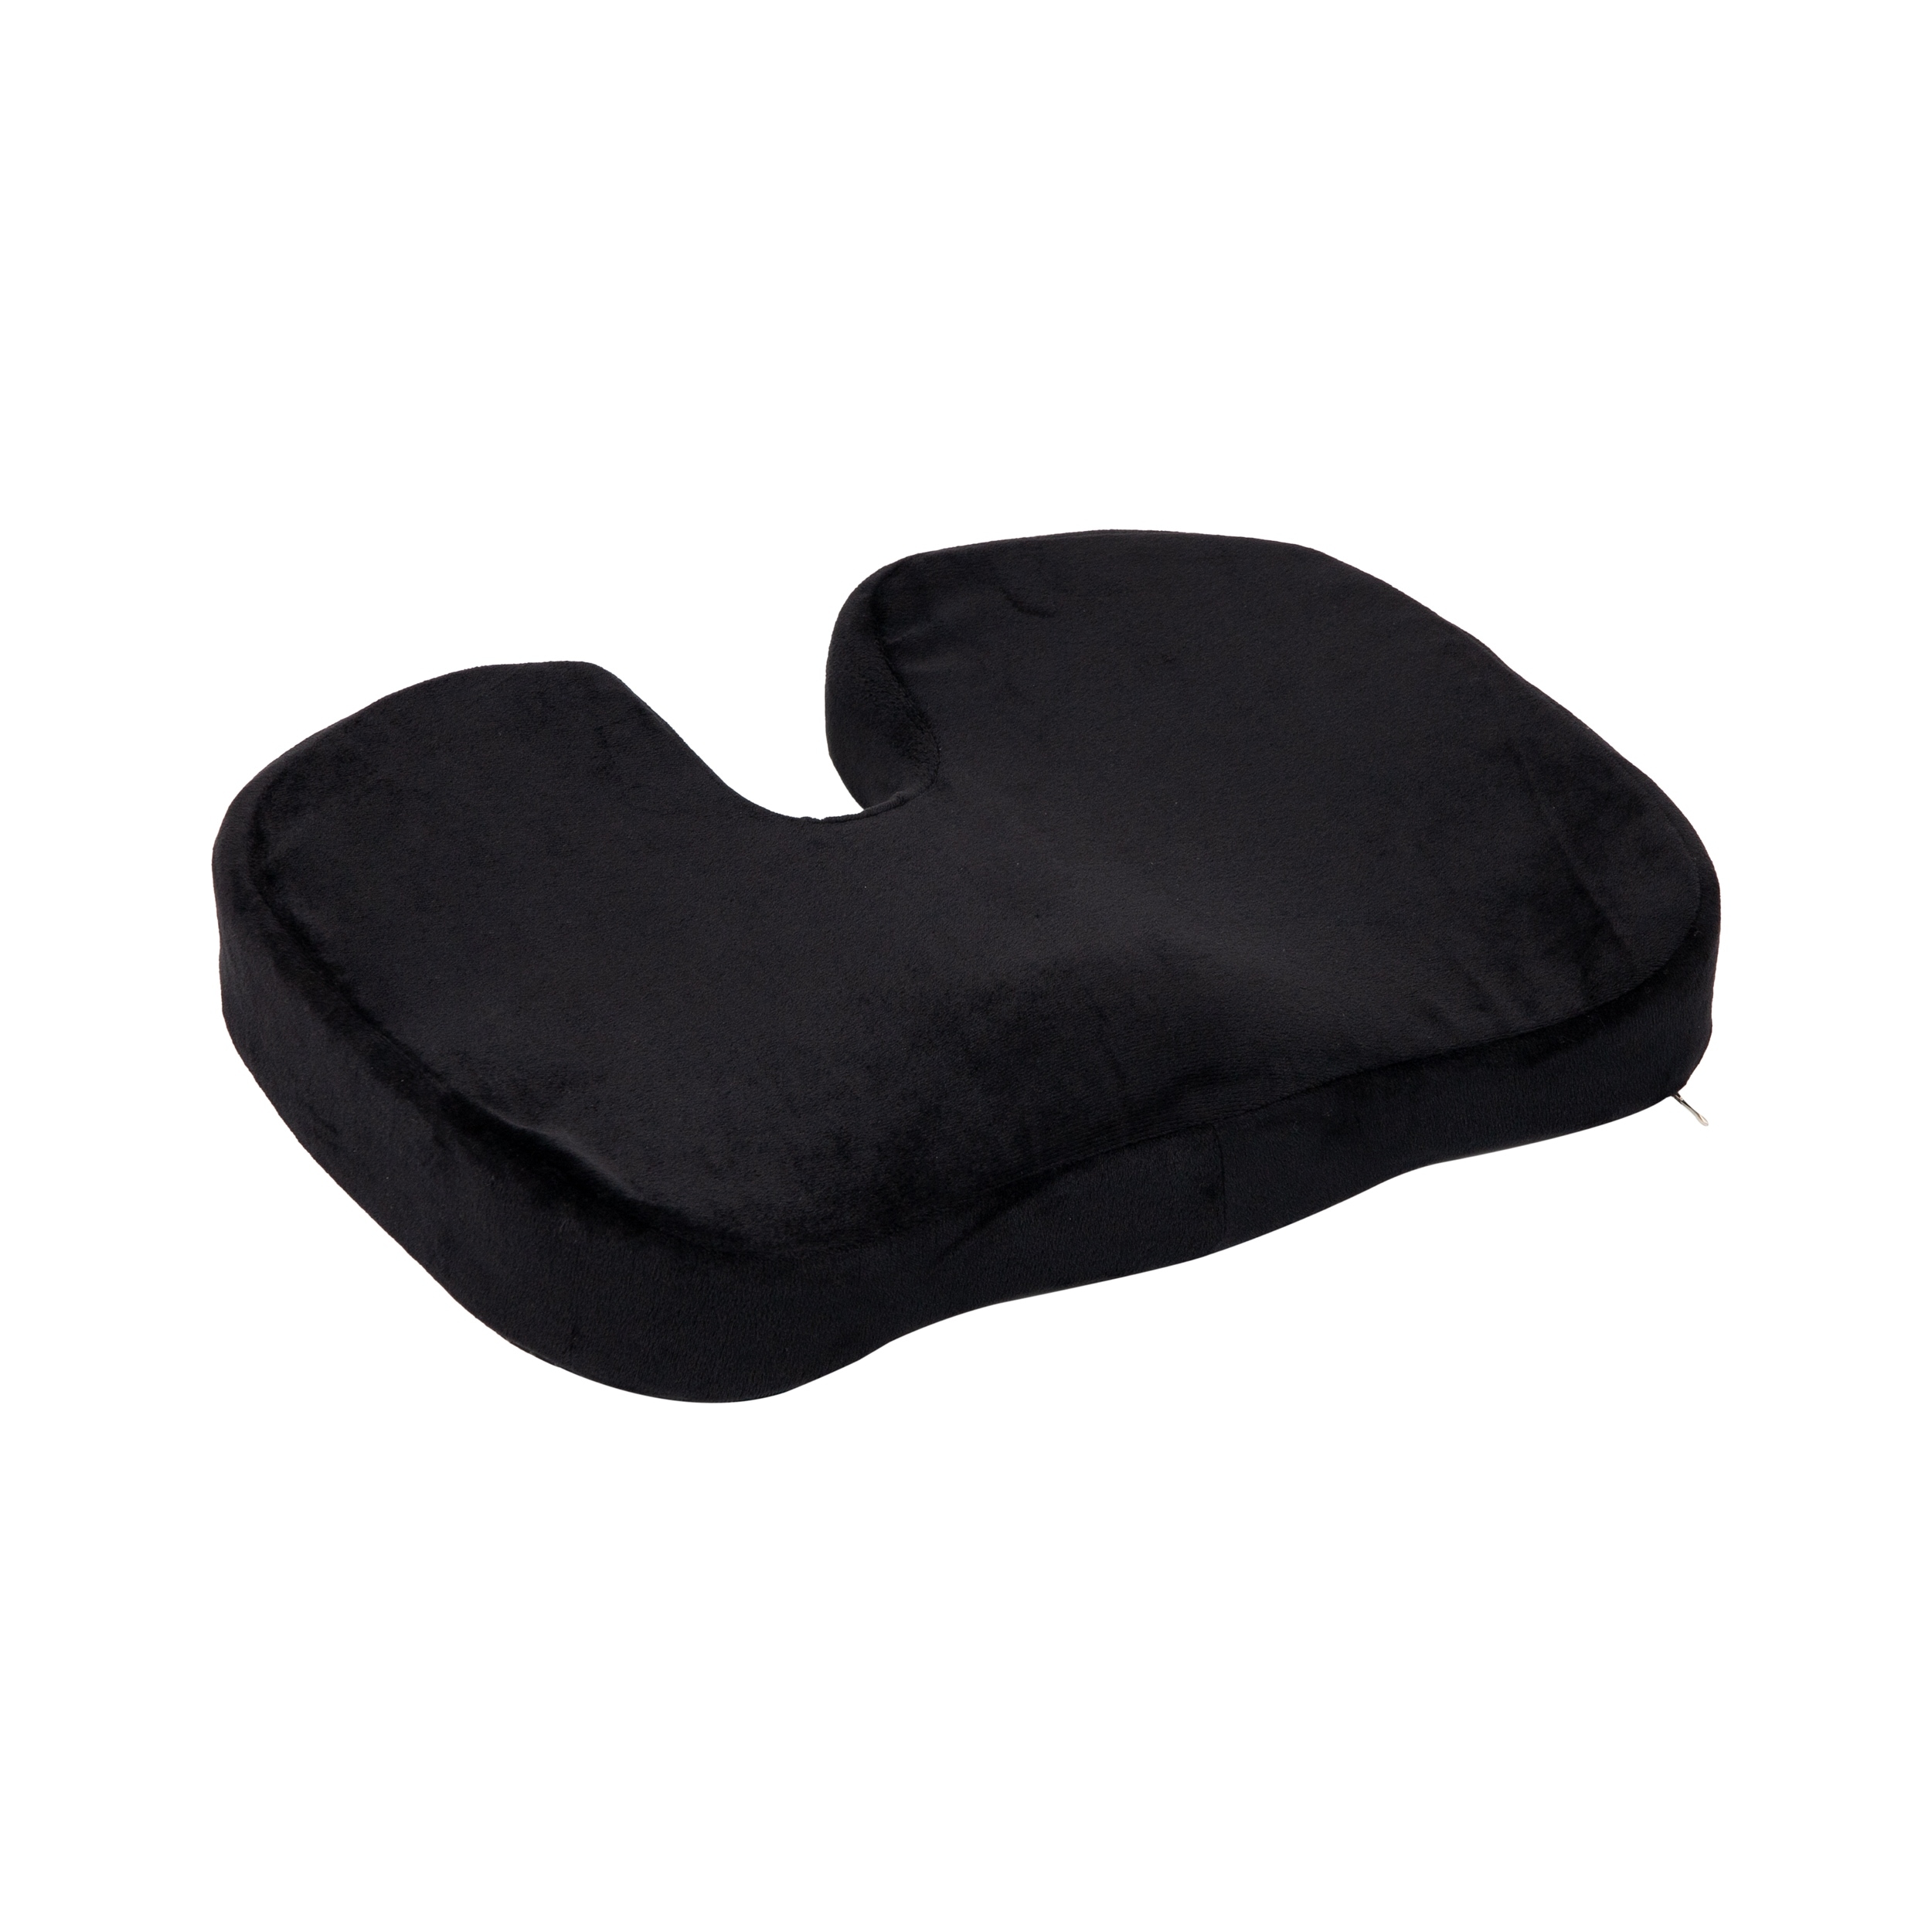 https://ak1.ostkcdn.com/images/products/is/images/direct/a560522d5ffced843d8266aa79439306c6a82bc8/Mind-Reader-Harmony-Collection%2C-Orthopedic-Seat-Cushion%2C-Ergonomic-Design.jpg